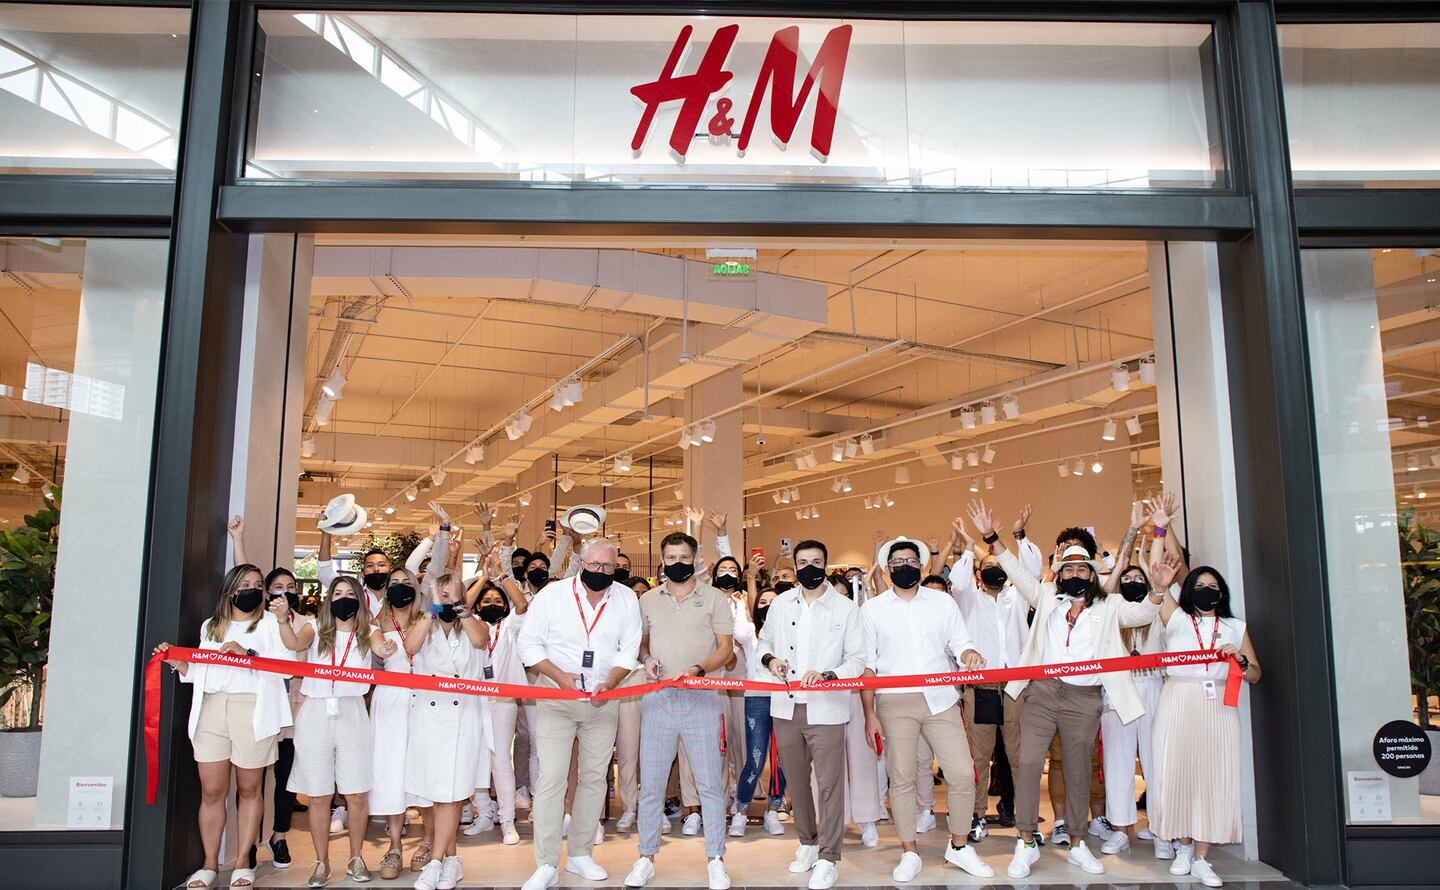 The scene at H&M's opening in Panama. H&M